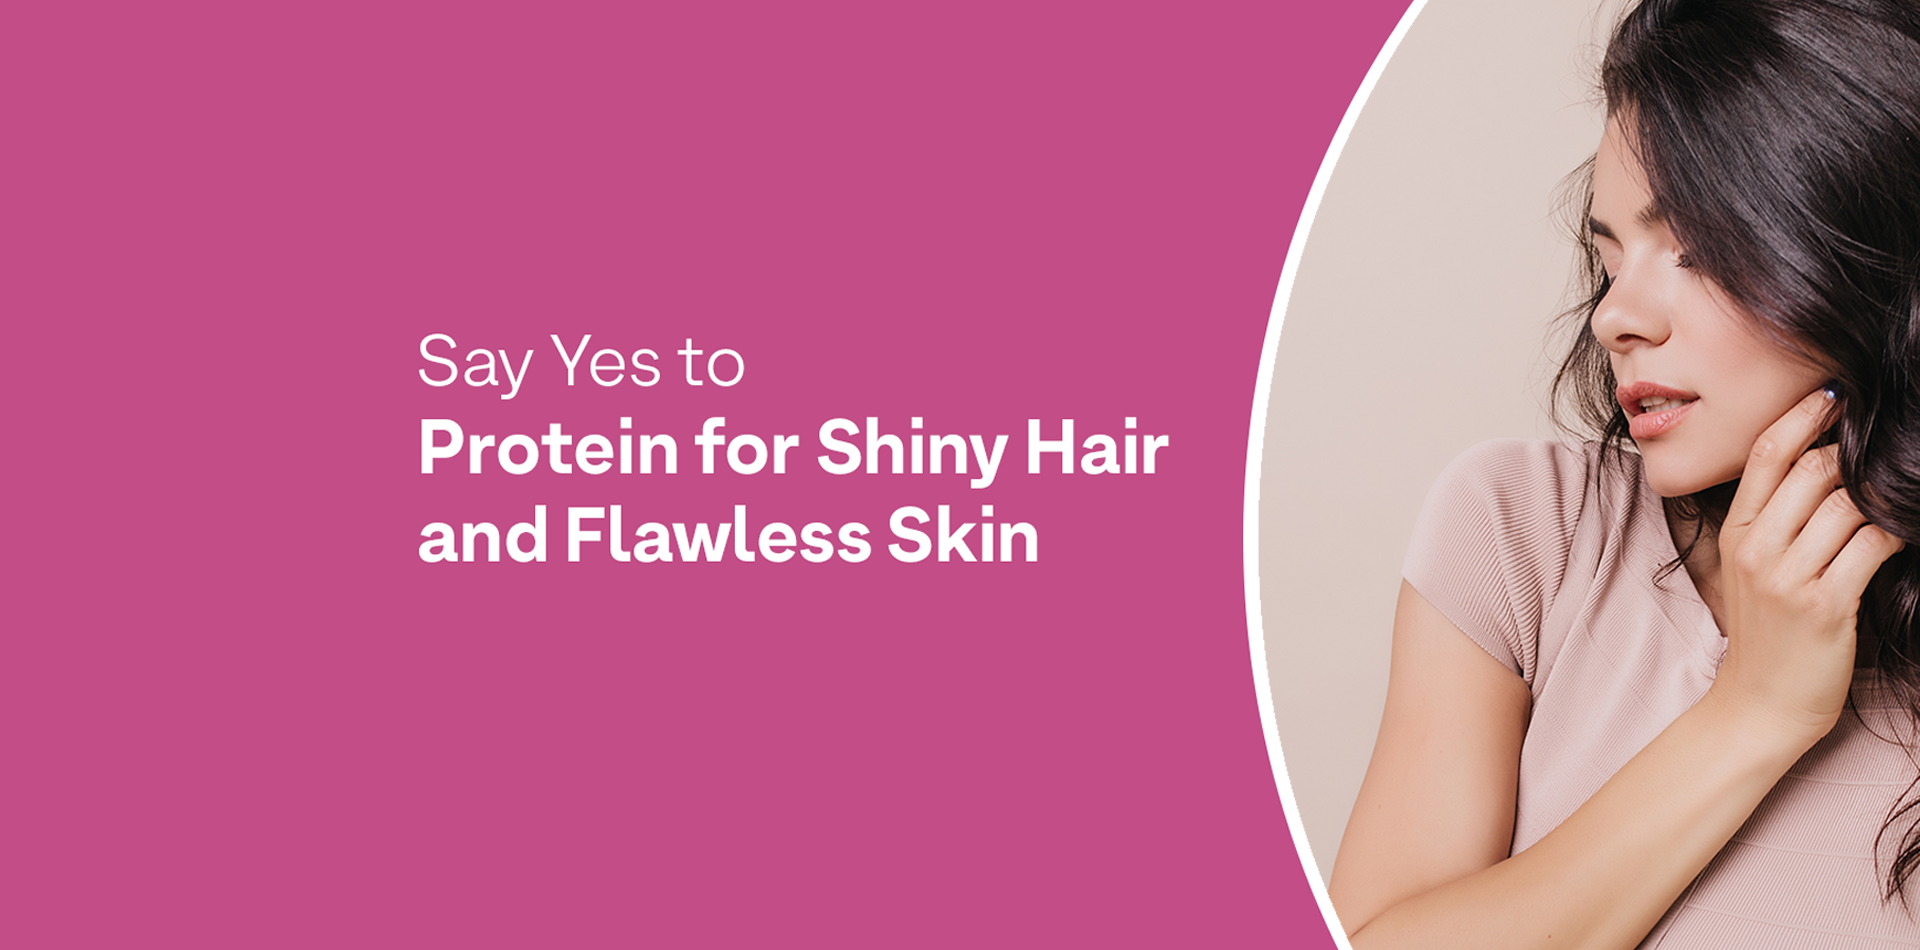 Say Yes to Protein for Shiny Hair and Flawless Skin